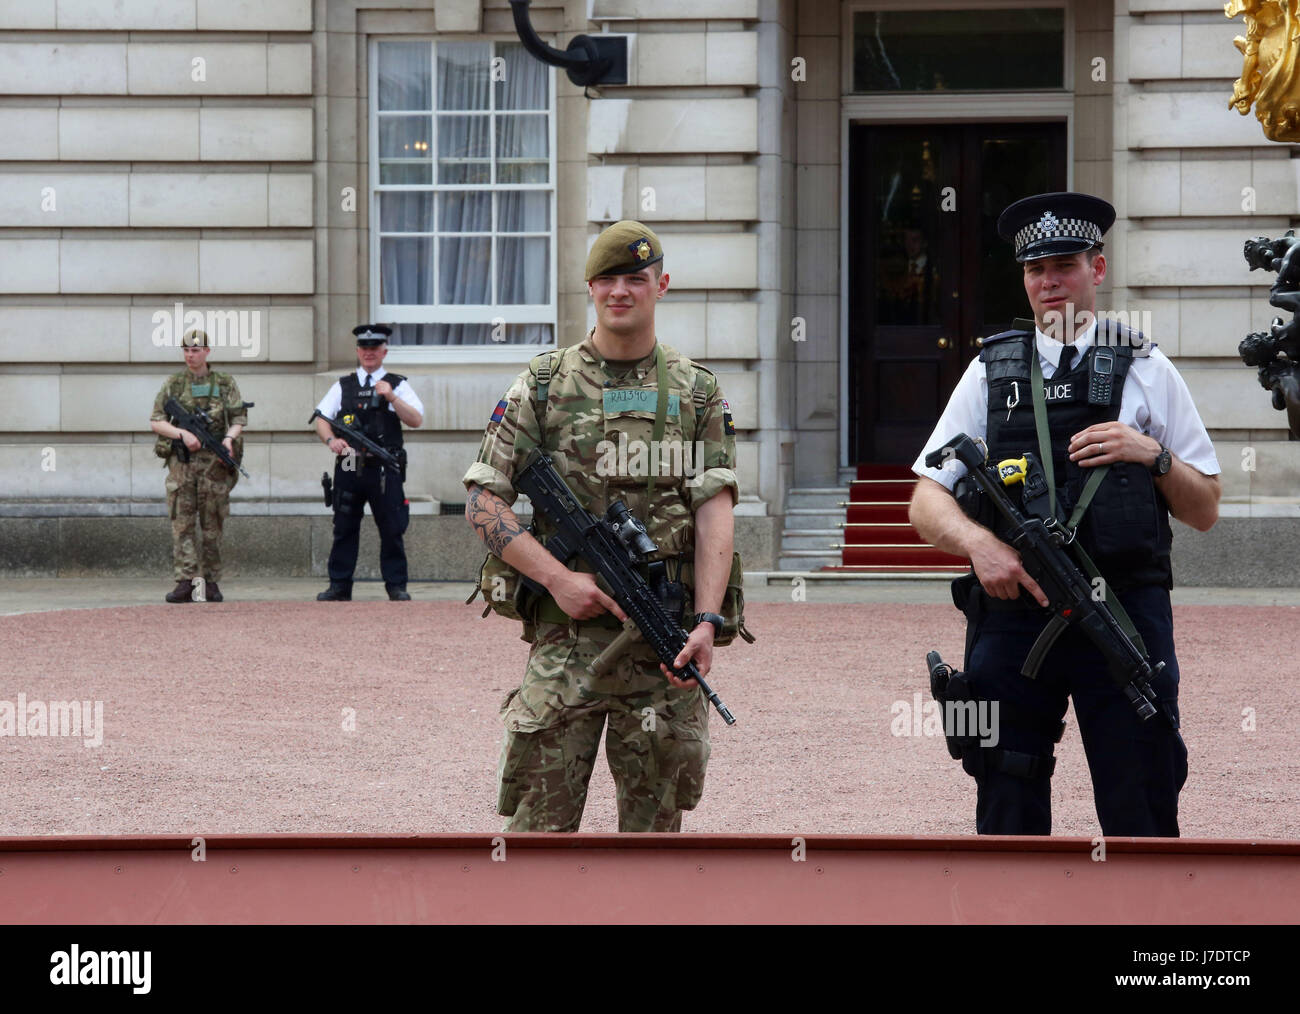 Members of the army join police officers outside Buckingham Palace, London, after Scotland Yard announced armed troops will be deployed to guard "key locations" such as Buckingham Palace, Downing Street, the Palace of Westminster and embassies. Stock Photo